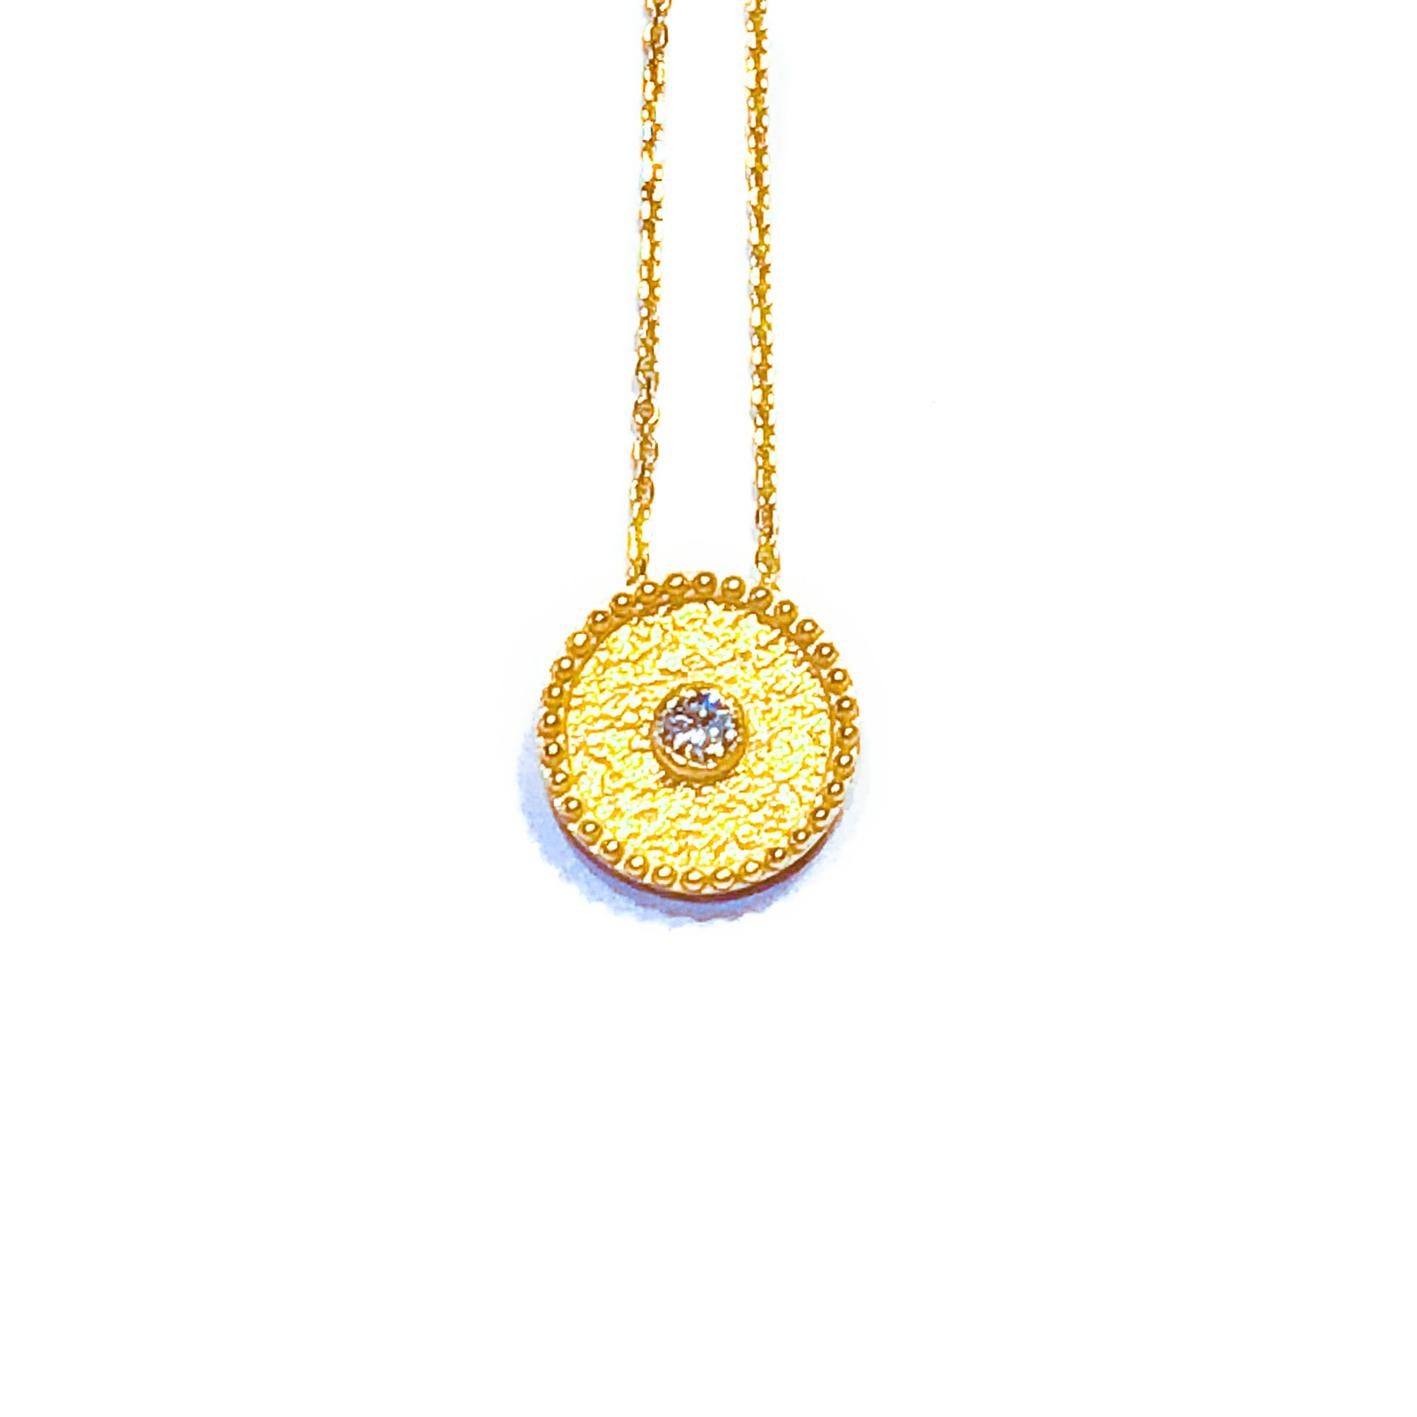 This S.Georgios Designer solitaire pendant is all handmade from solid 18 Karat Yellow Gold and is microscopically decorated with granulation work all the way around. This gorgeous elegant piece is to be worn every day and we make it with a unique